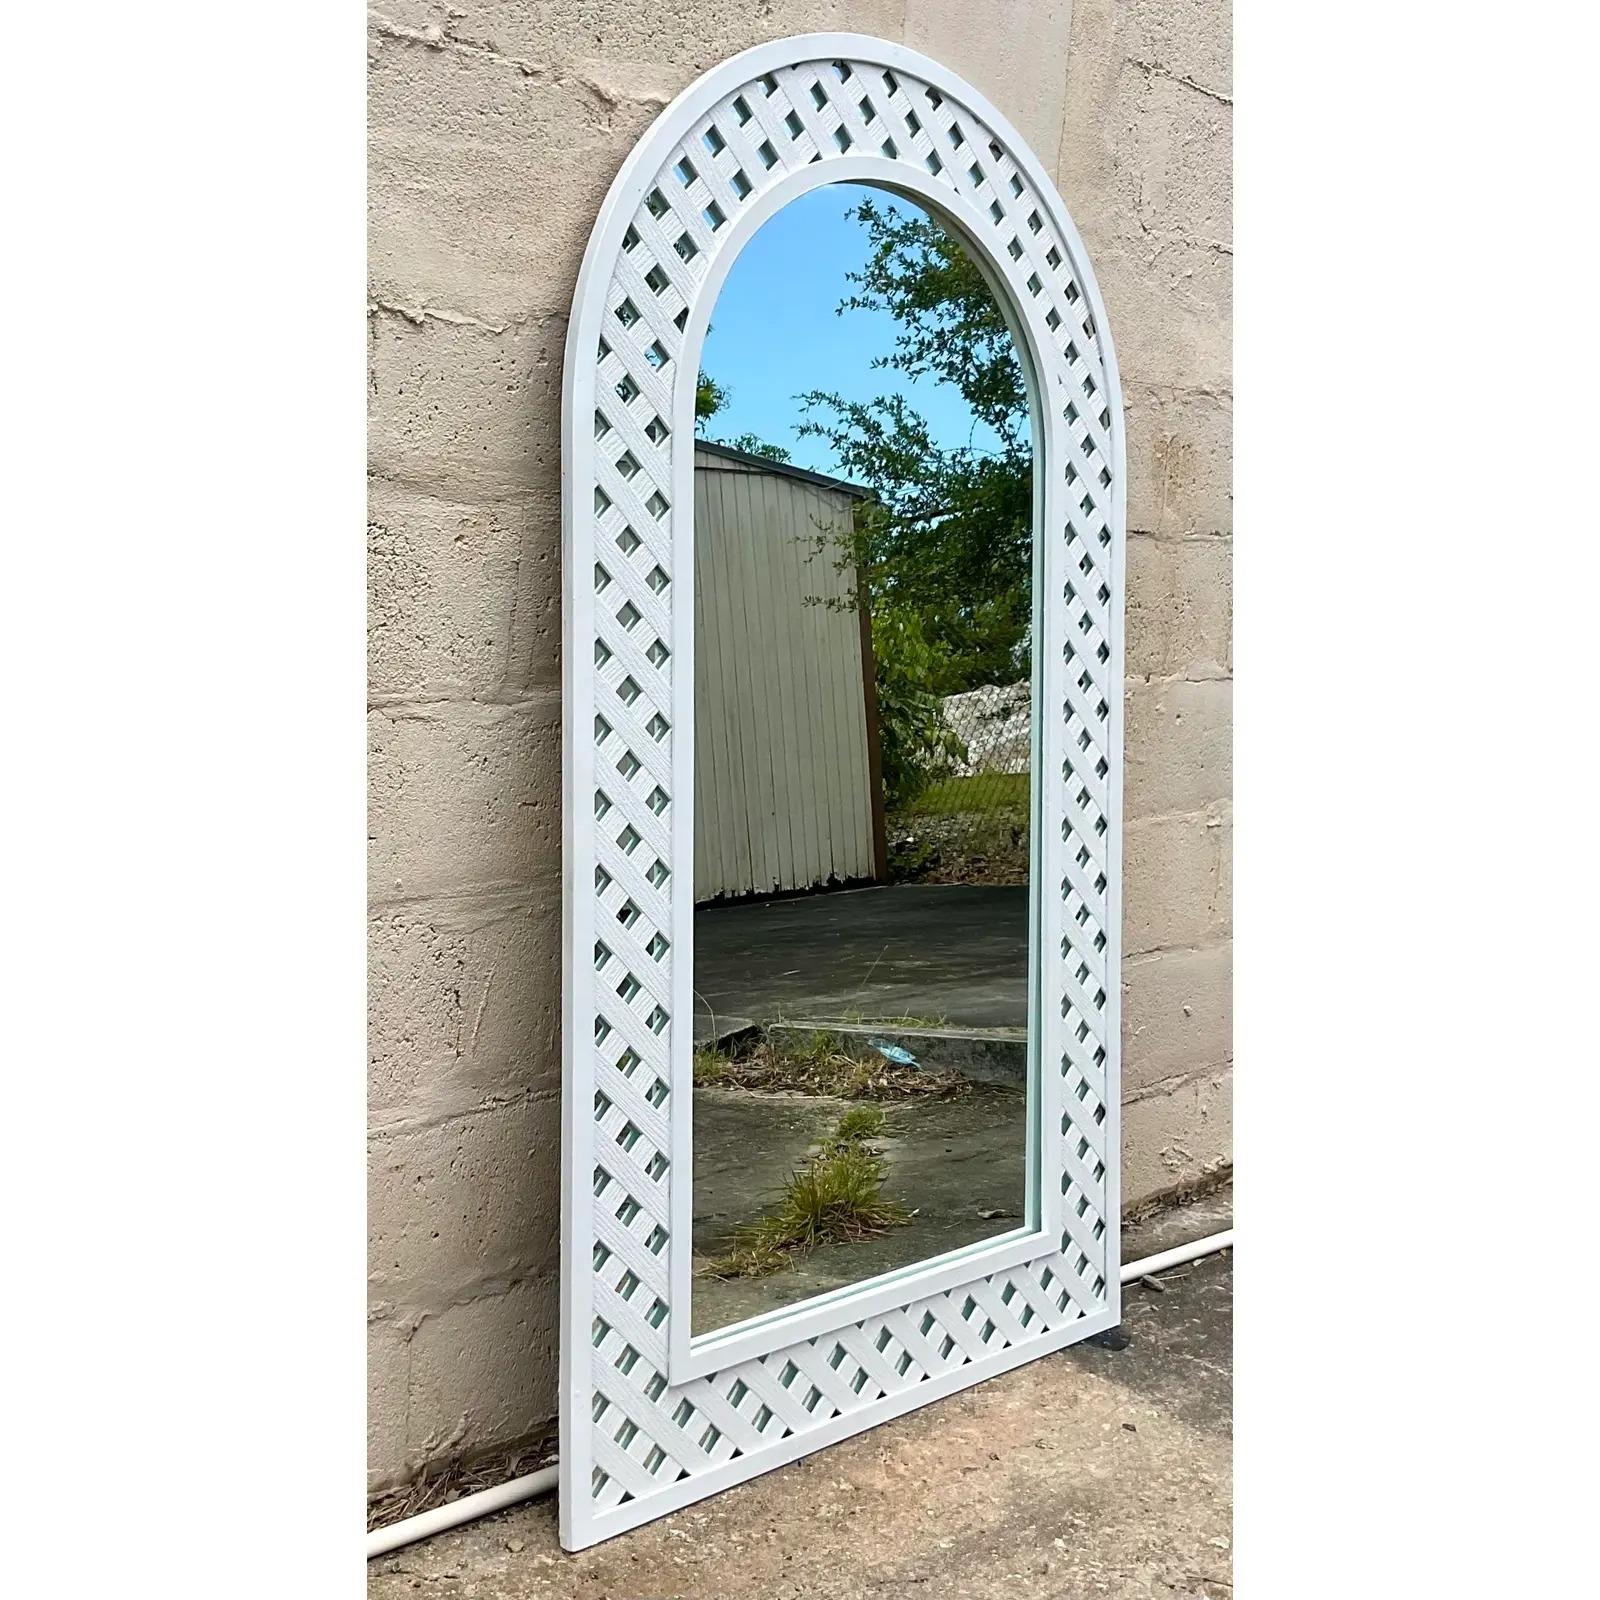 Fantastic vintage Coastal mirror. Beautiful arched design with a classic trellis treatment. Painted a chic plaster white. Acquired from a Palm Beach estate.